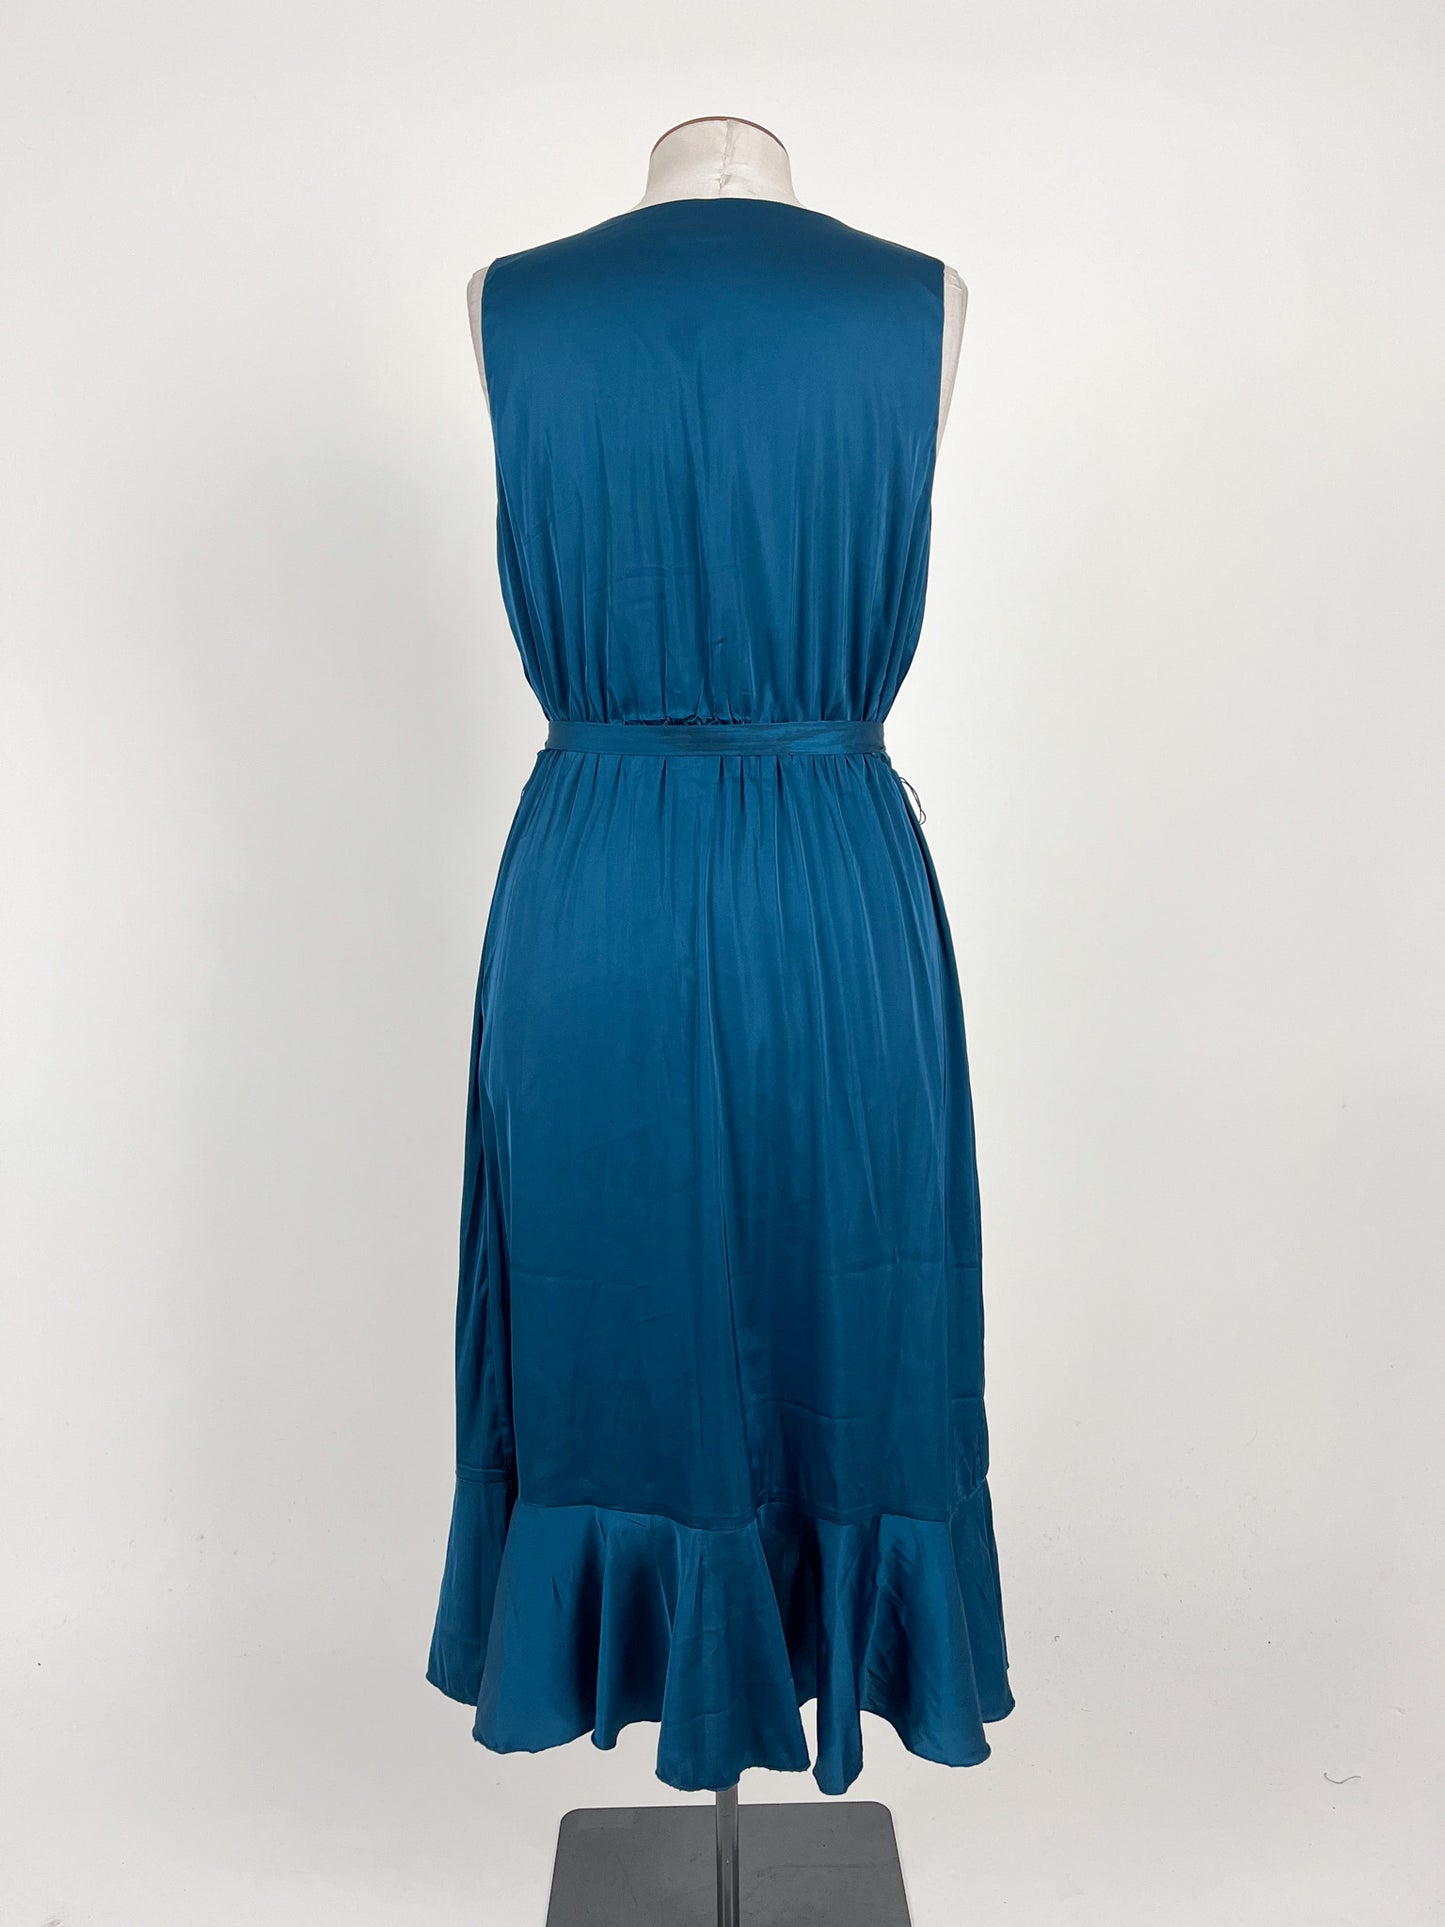 Atmos & Here | Blue Cocktail/Formal Dress | Size 10